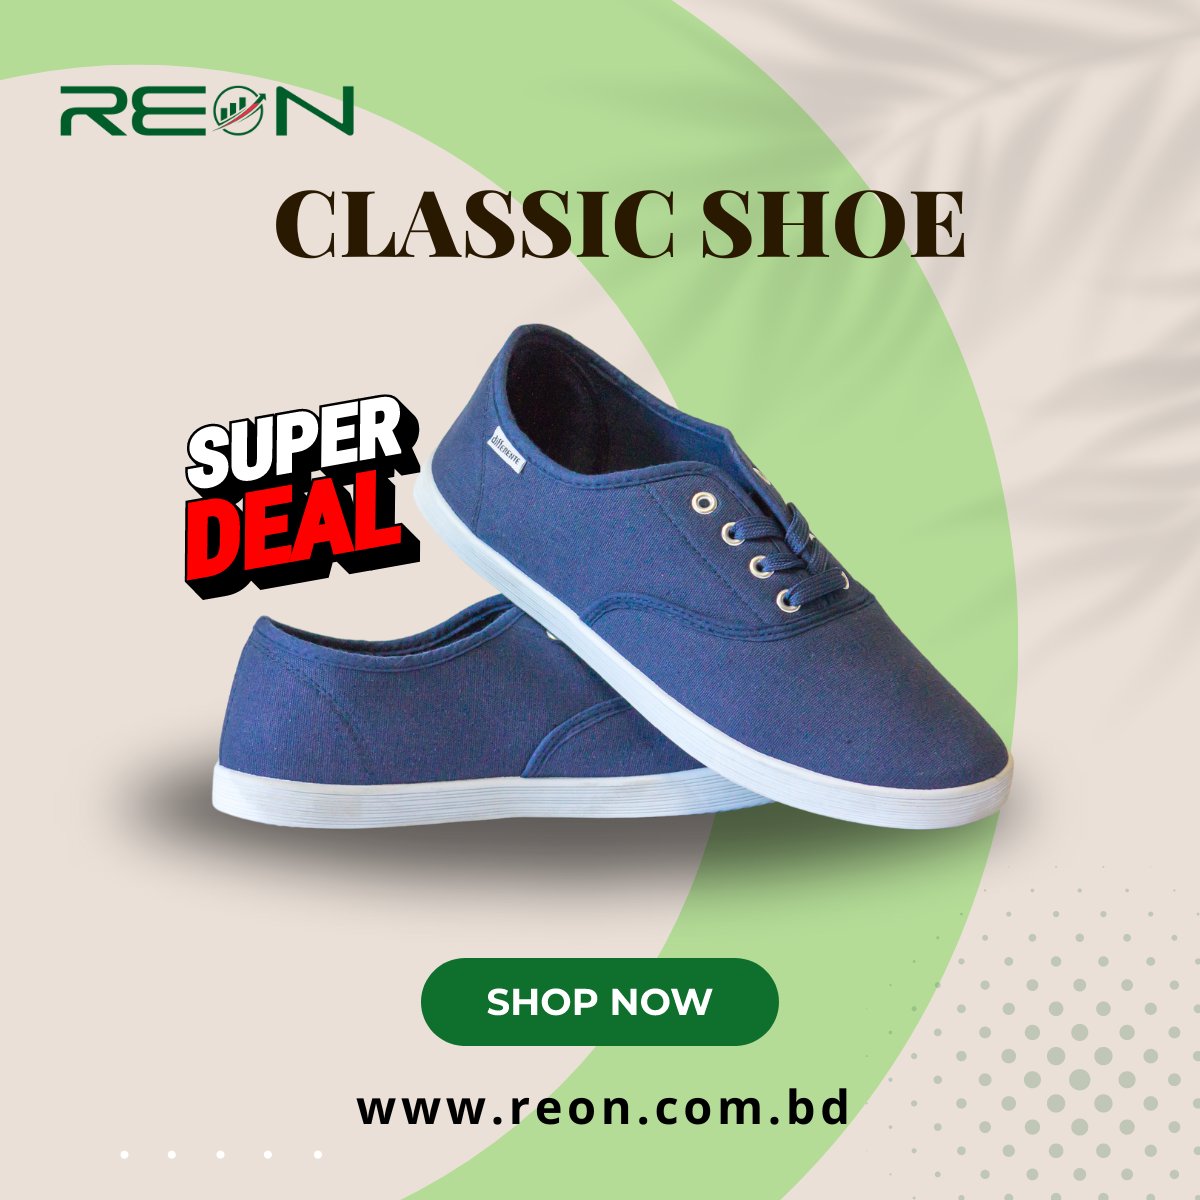 New Blue Comfort Shoes📷 Step into style and performance.

Shop now and save!
reon.com.bd
#ShoeSale #blackfridaydeals #reononlineshop #reonshopping #Reon #ShopNow #buynow #flashsale